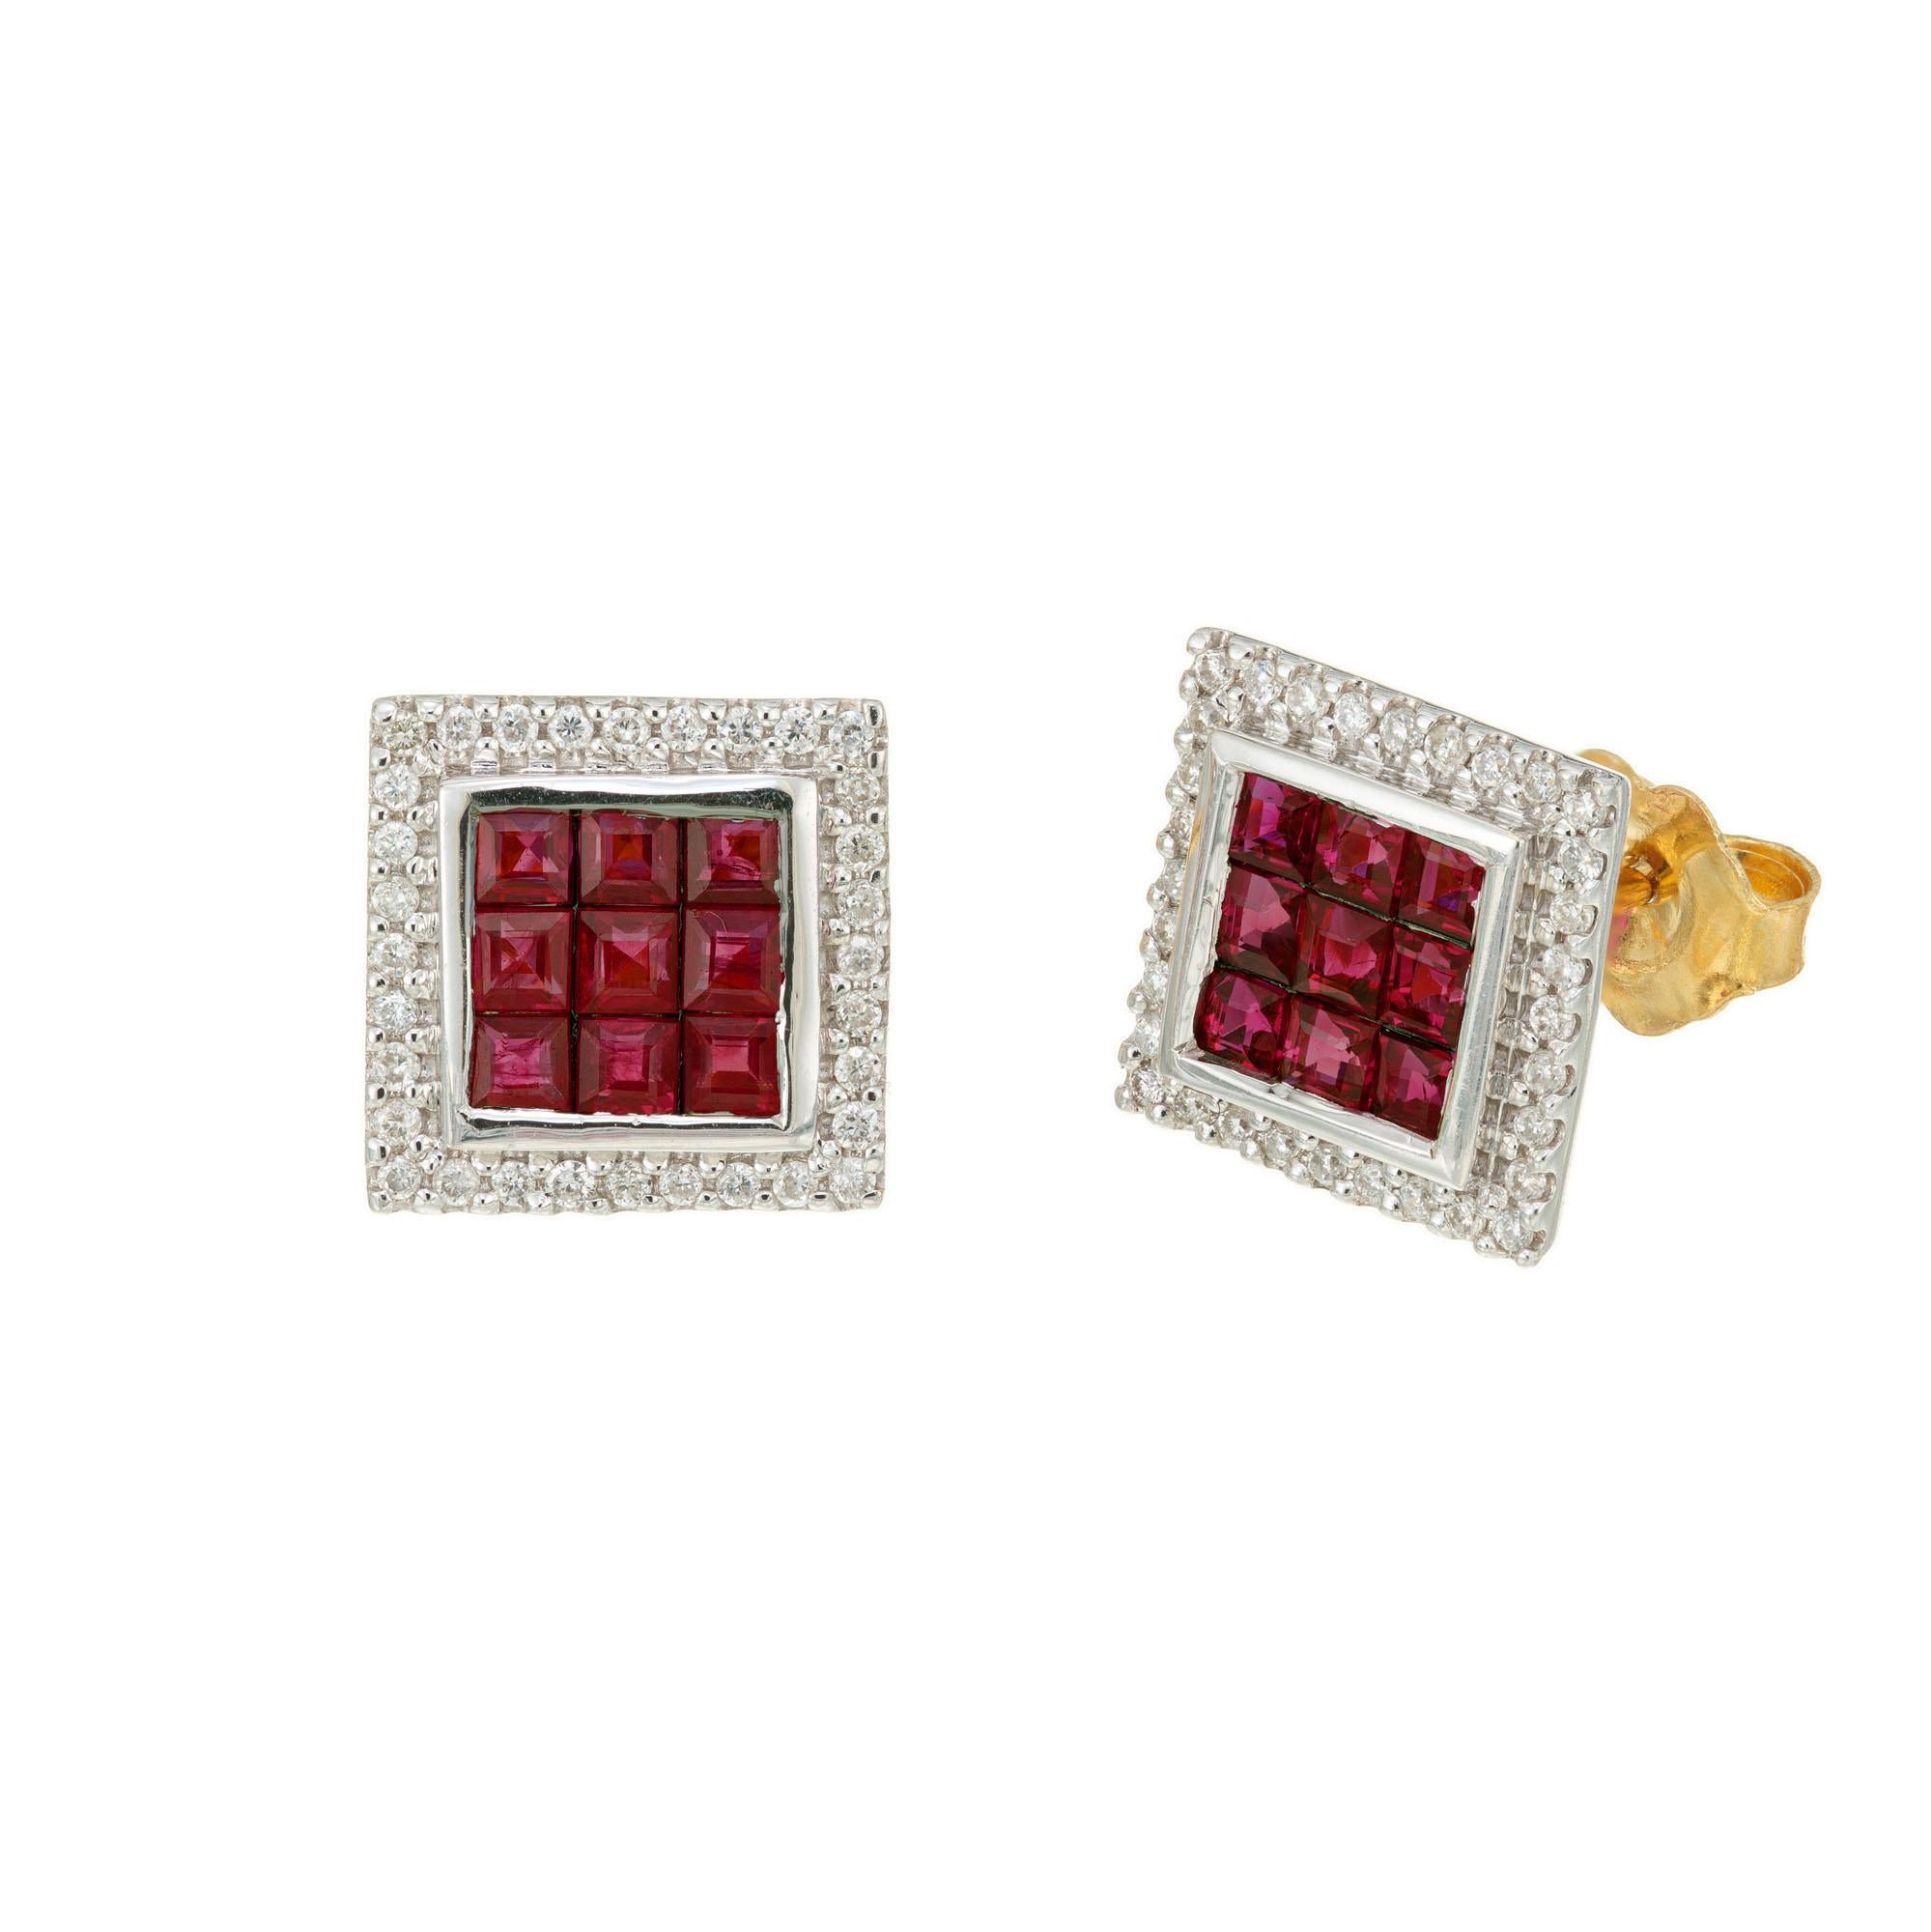 Square Cut 1.15 Carat Square Ruby Diamond Halo Gold Earrings For Sale